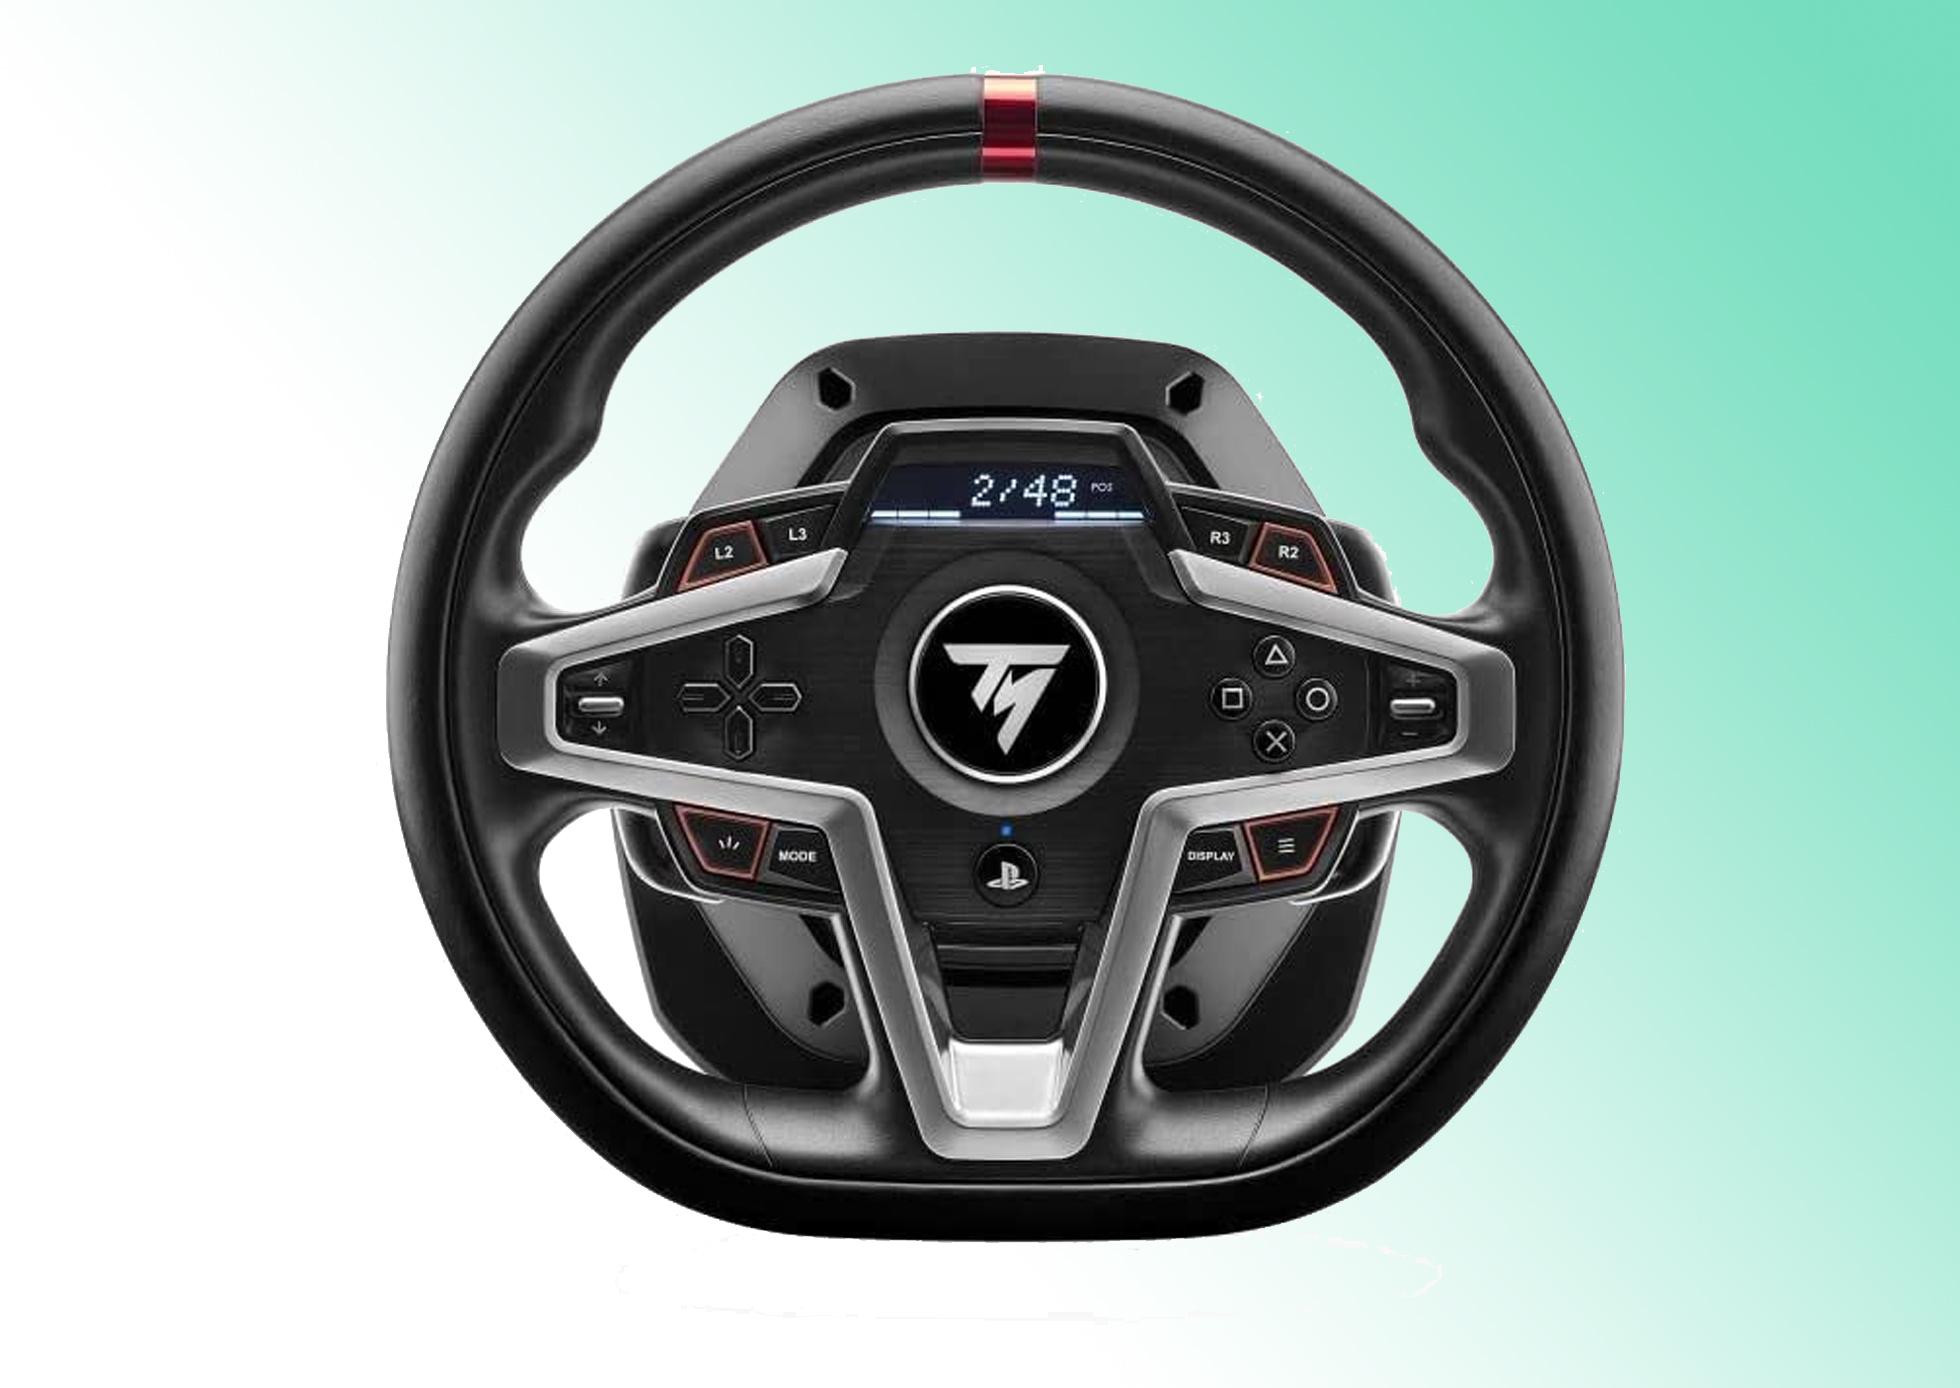 Thrustmaster T248 steering wheel test and review